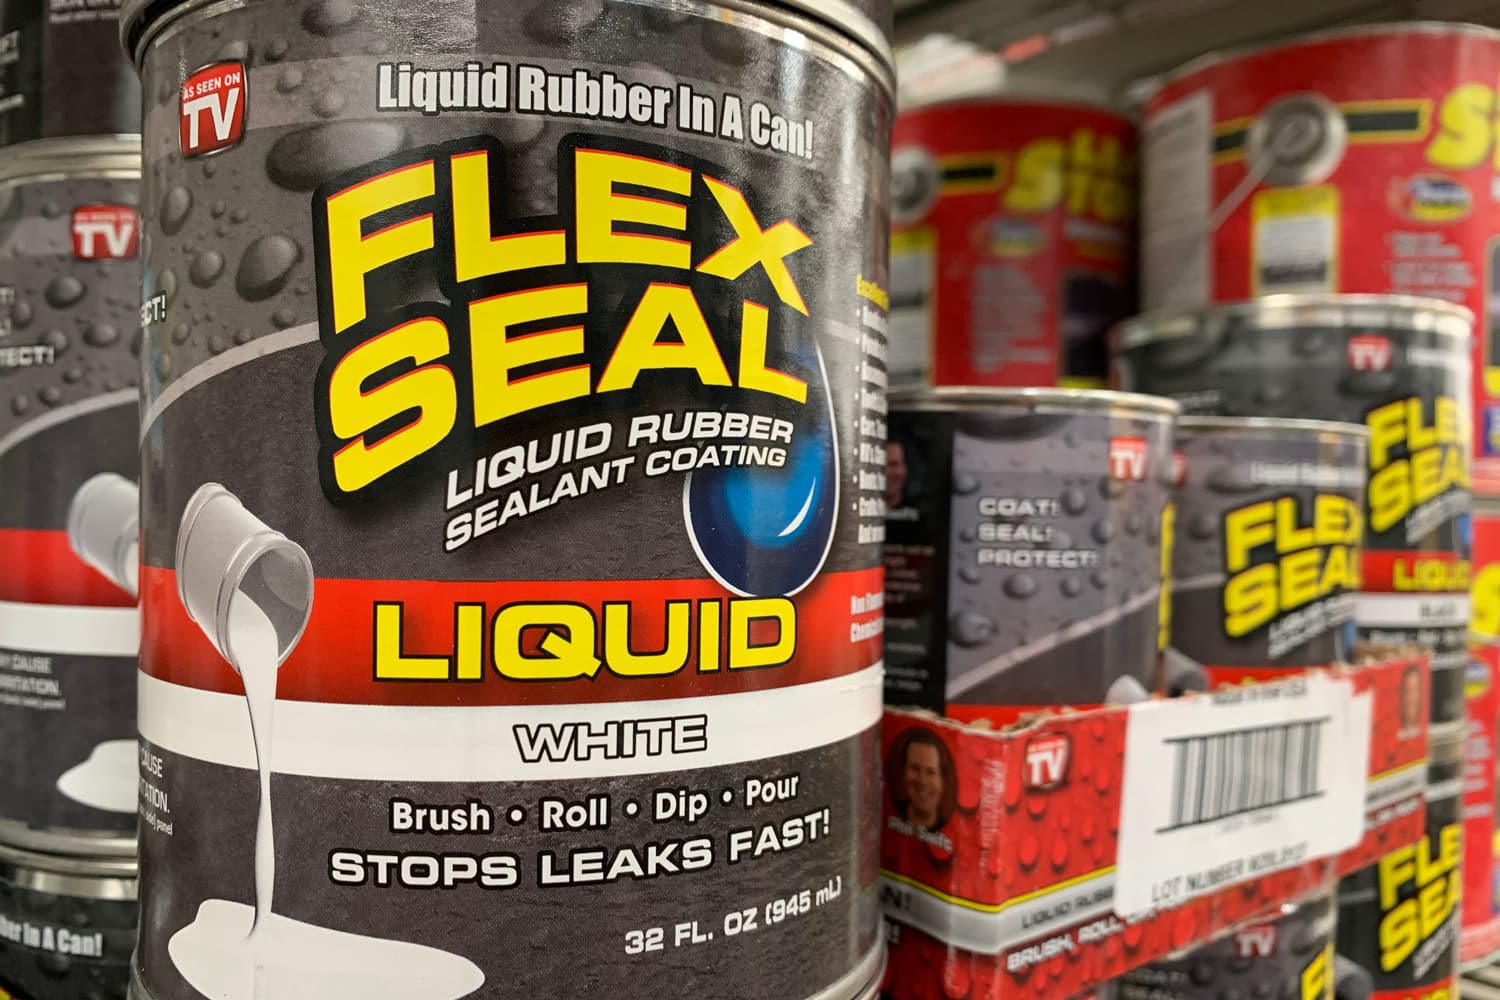 Cans of Flex Seal on a Store Shelf